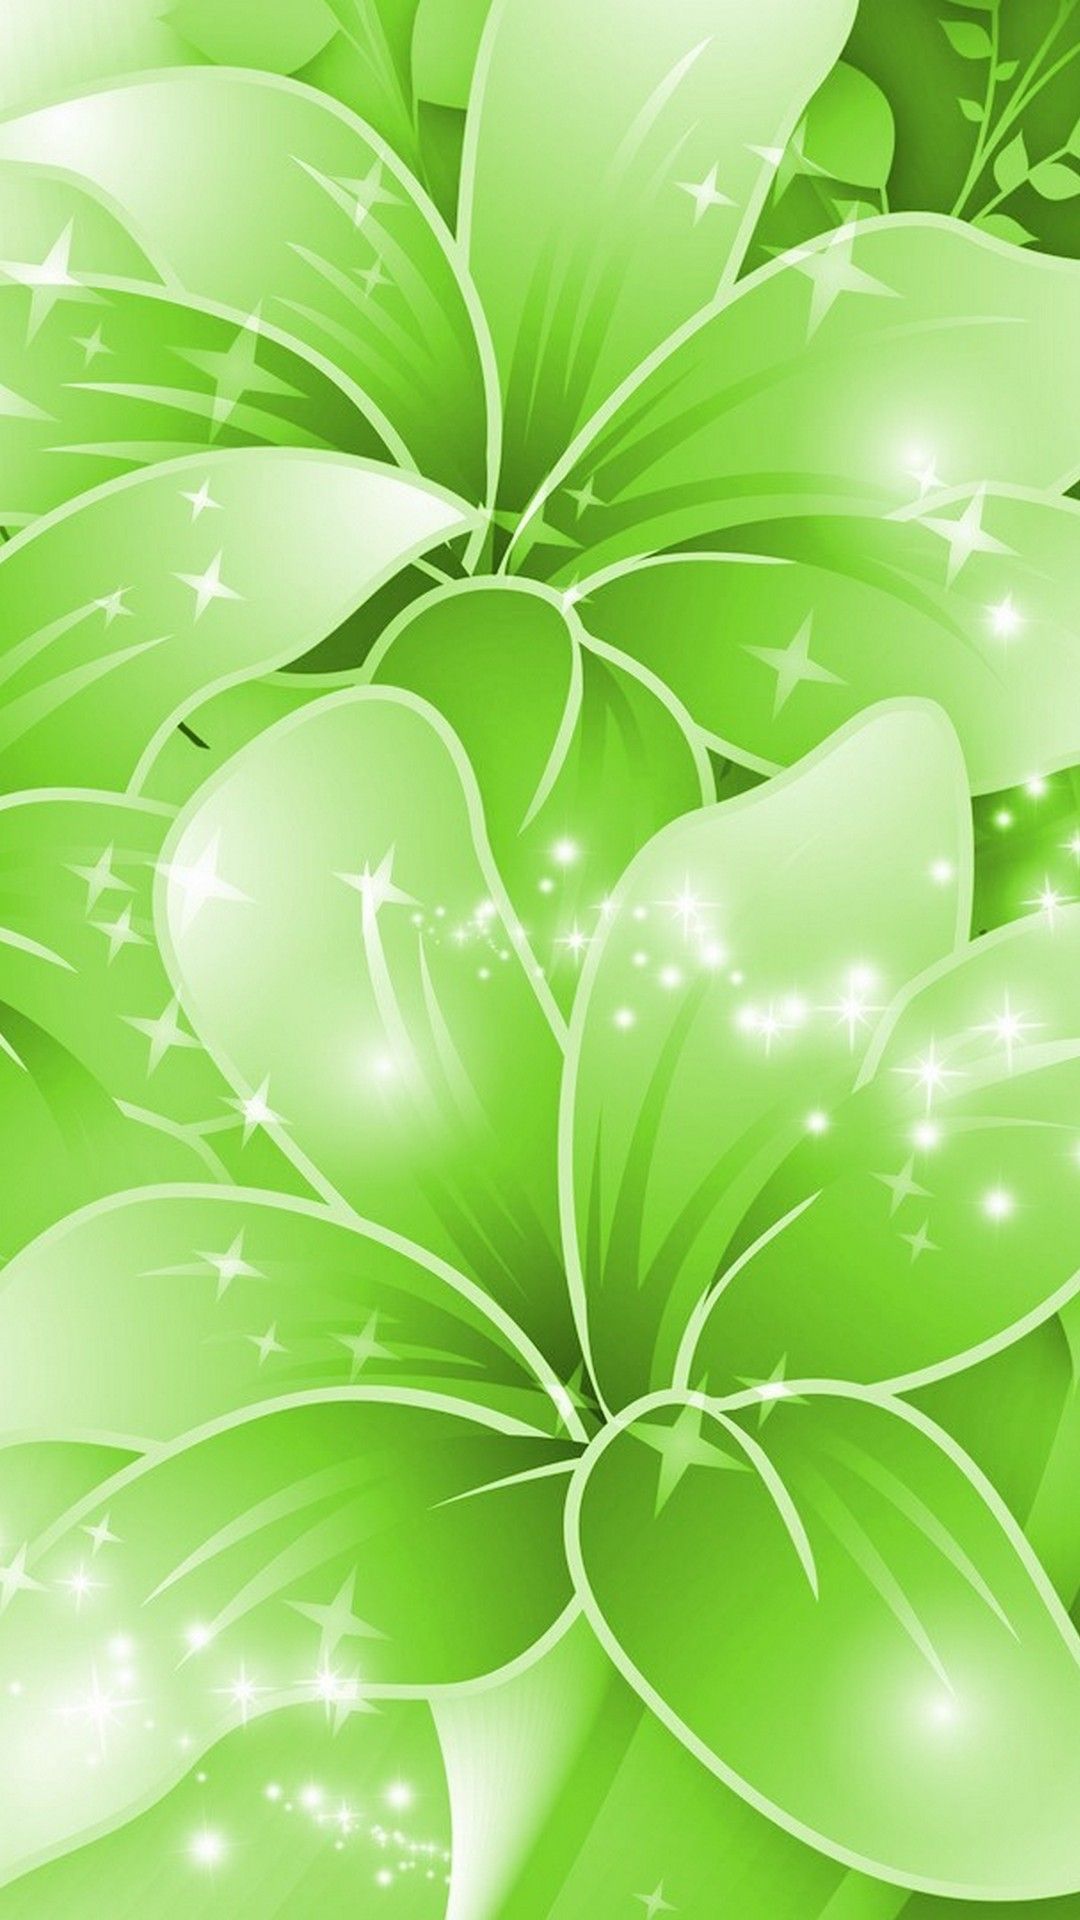 Wallpaper Android Green Colour Android Wallpaper